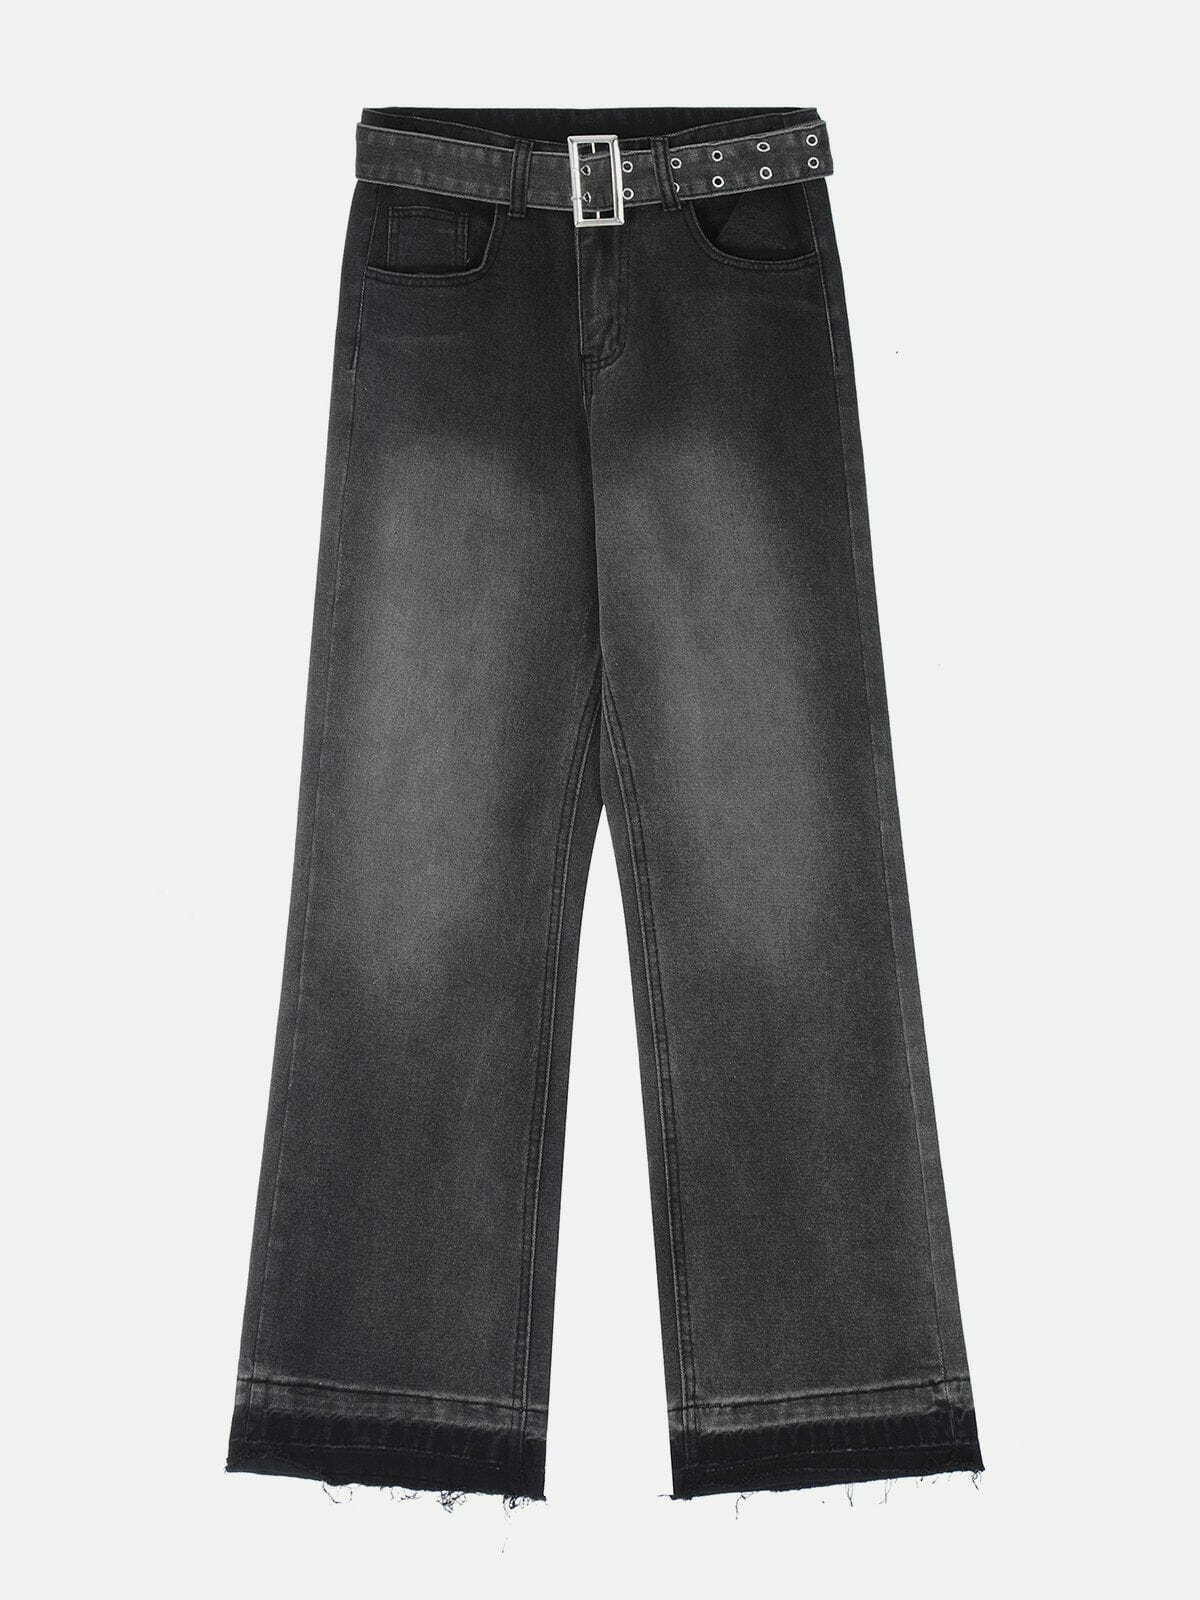 raw edge belted jeans edgy & stylish streetwear 2326